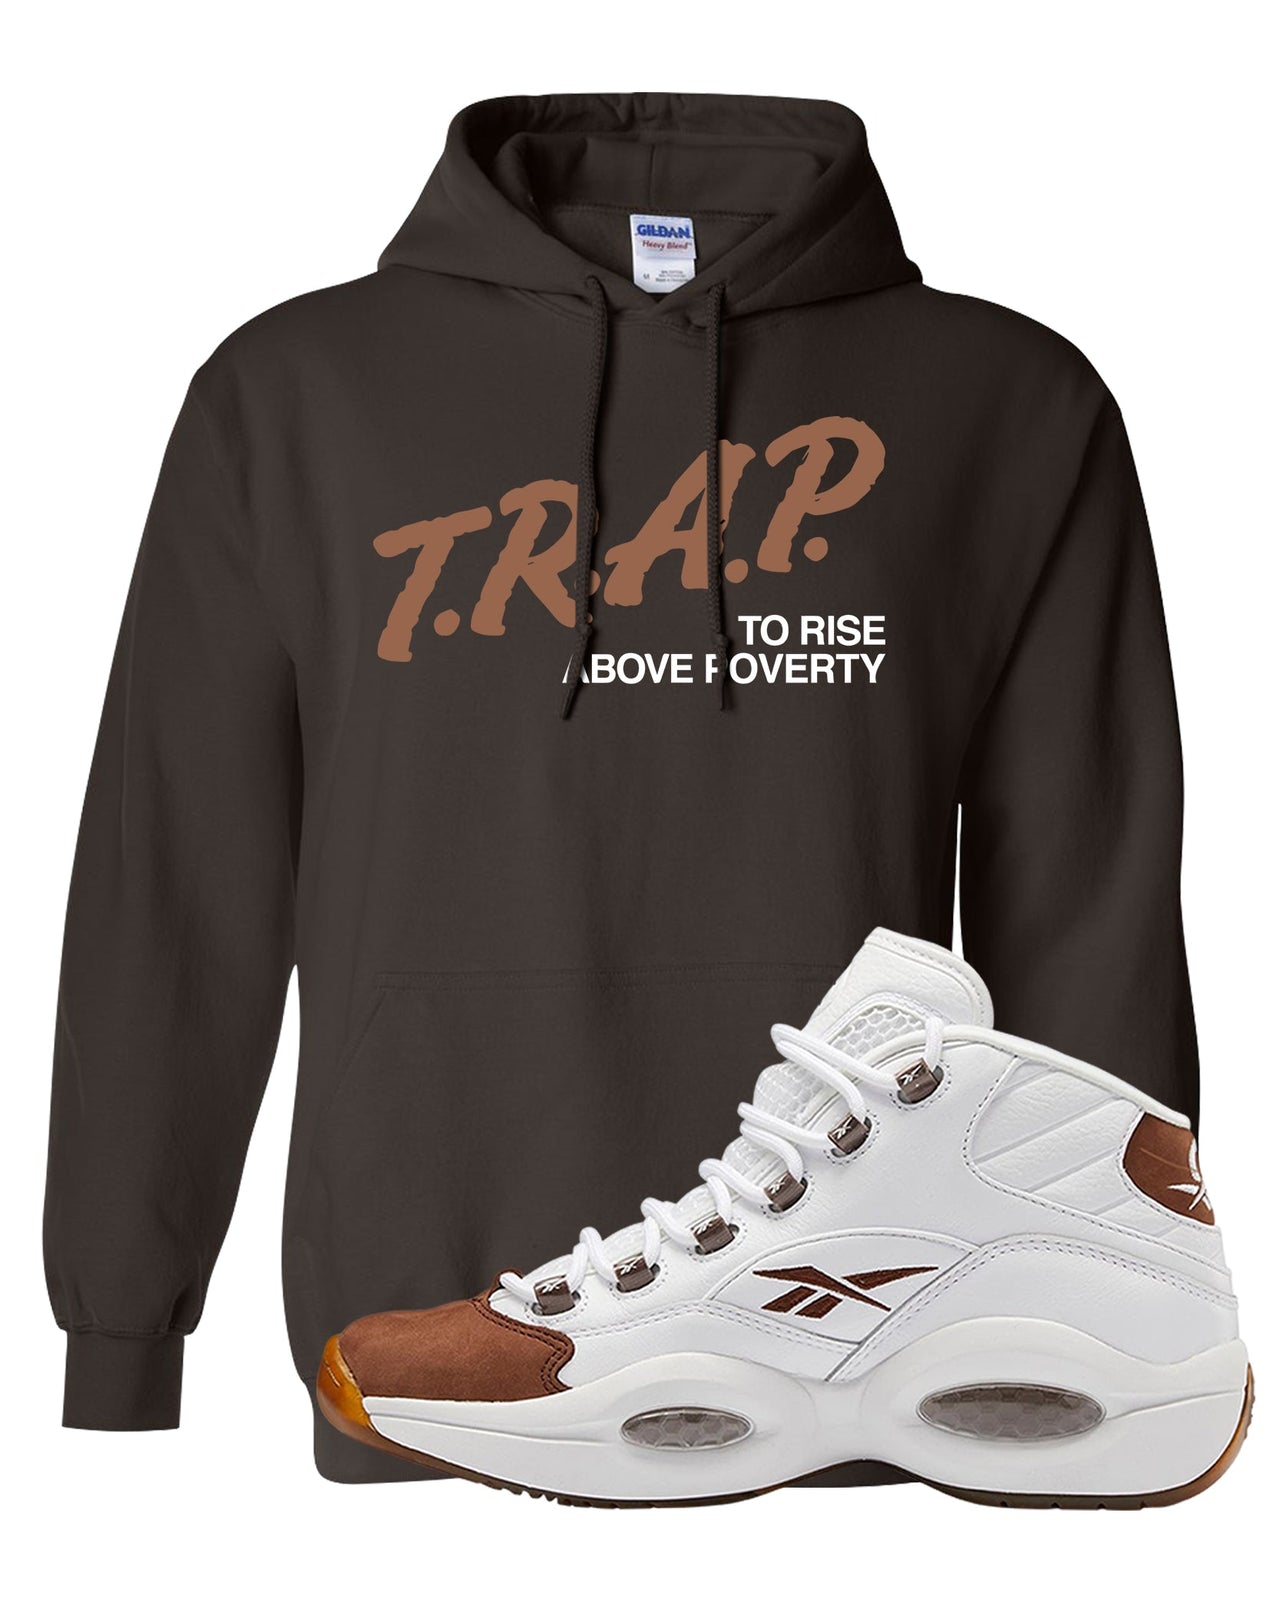 Mocha Question Mids Hoodie | Trap To Rise Above Poverty, Dark Chocolate